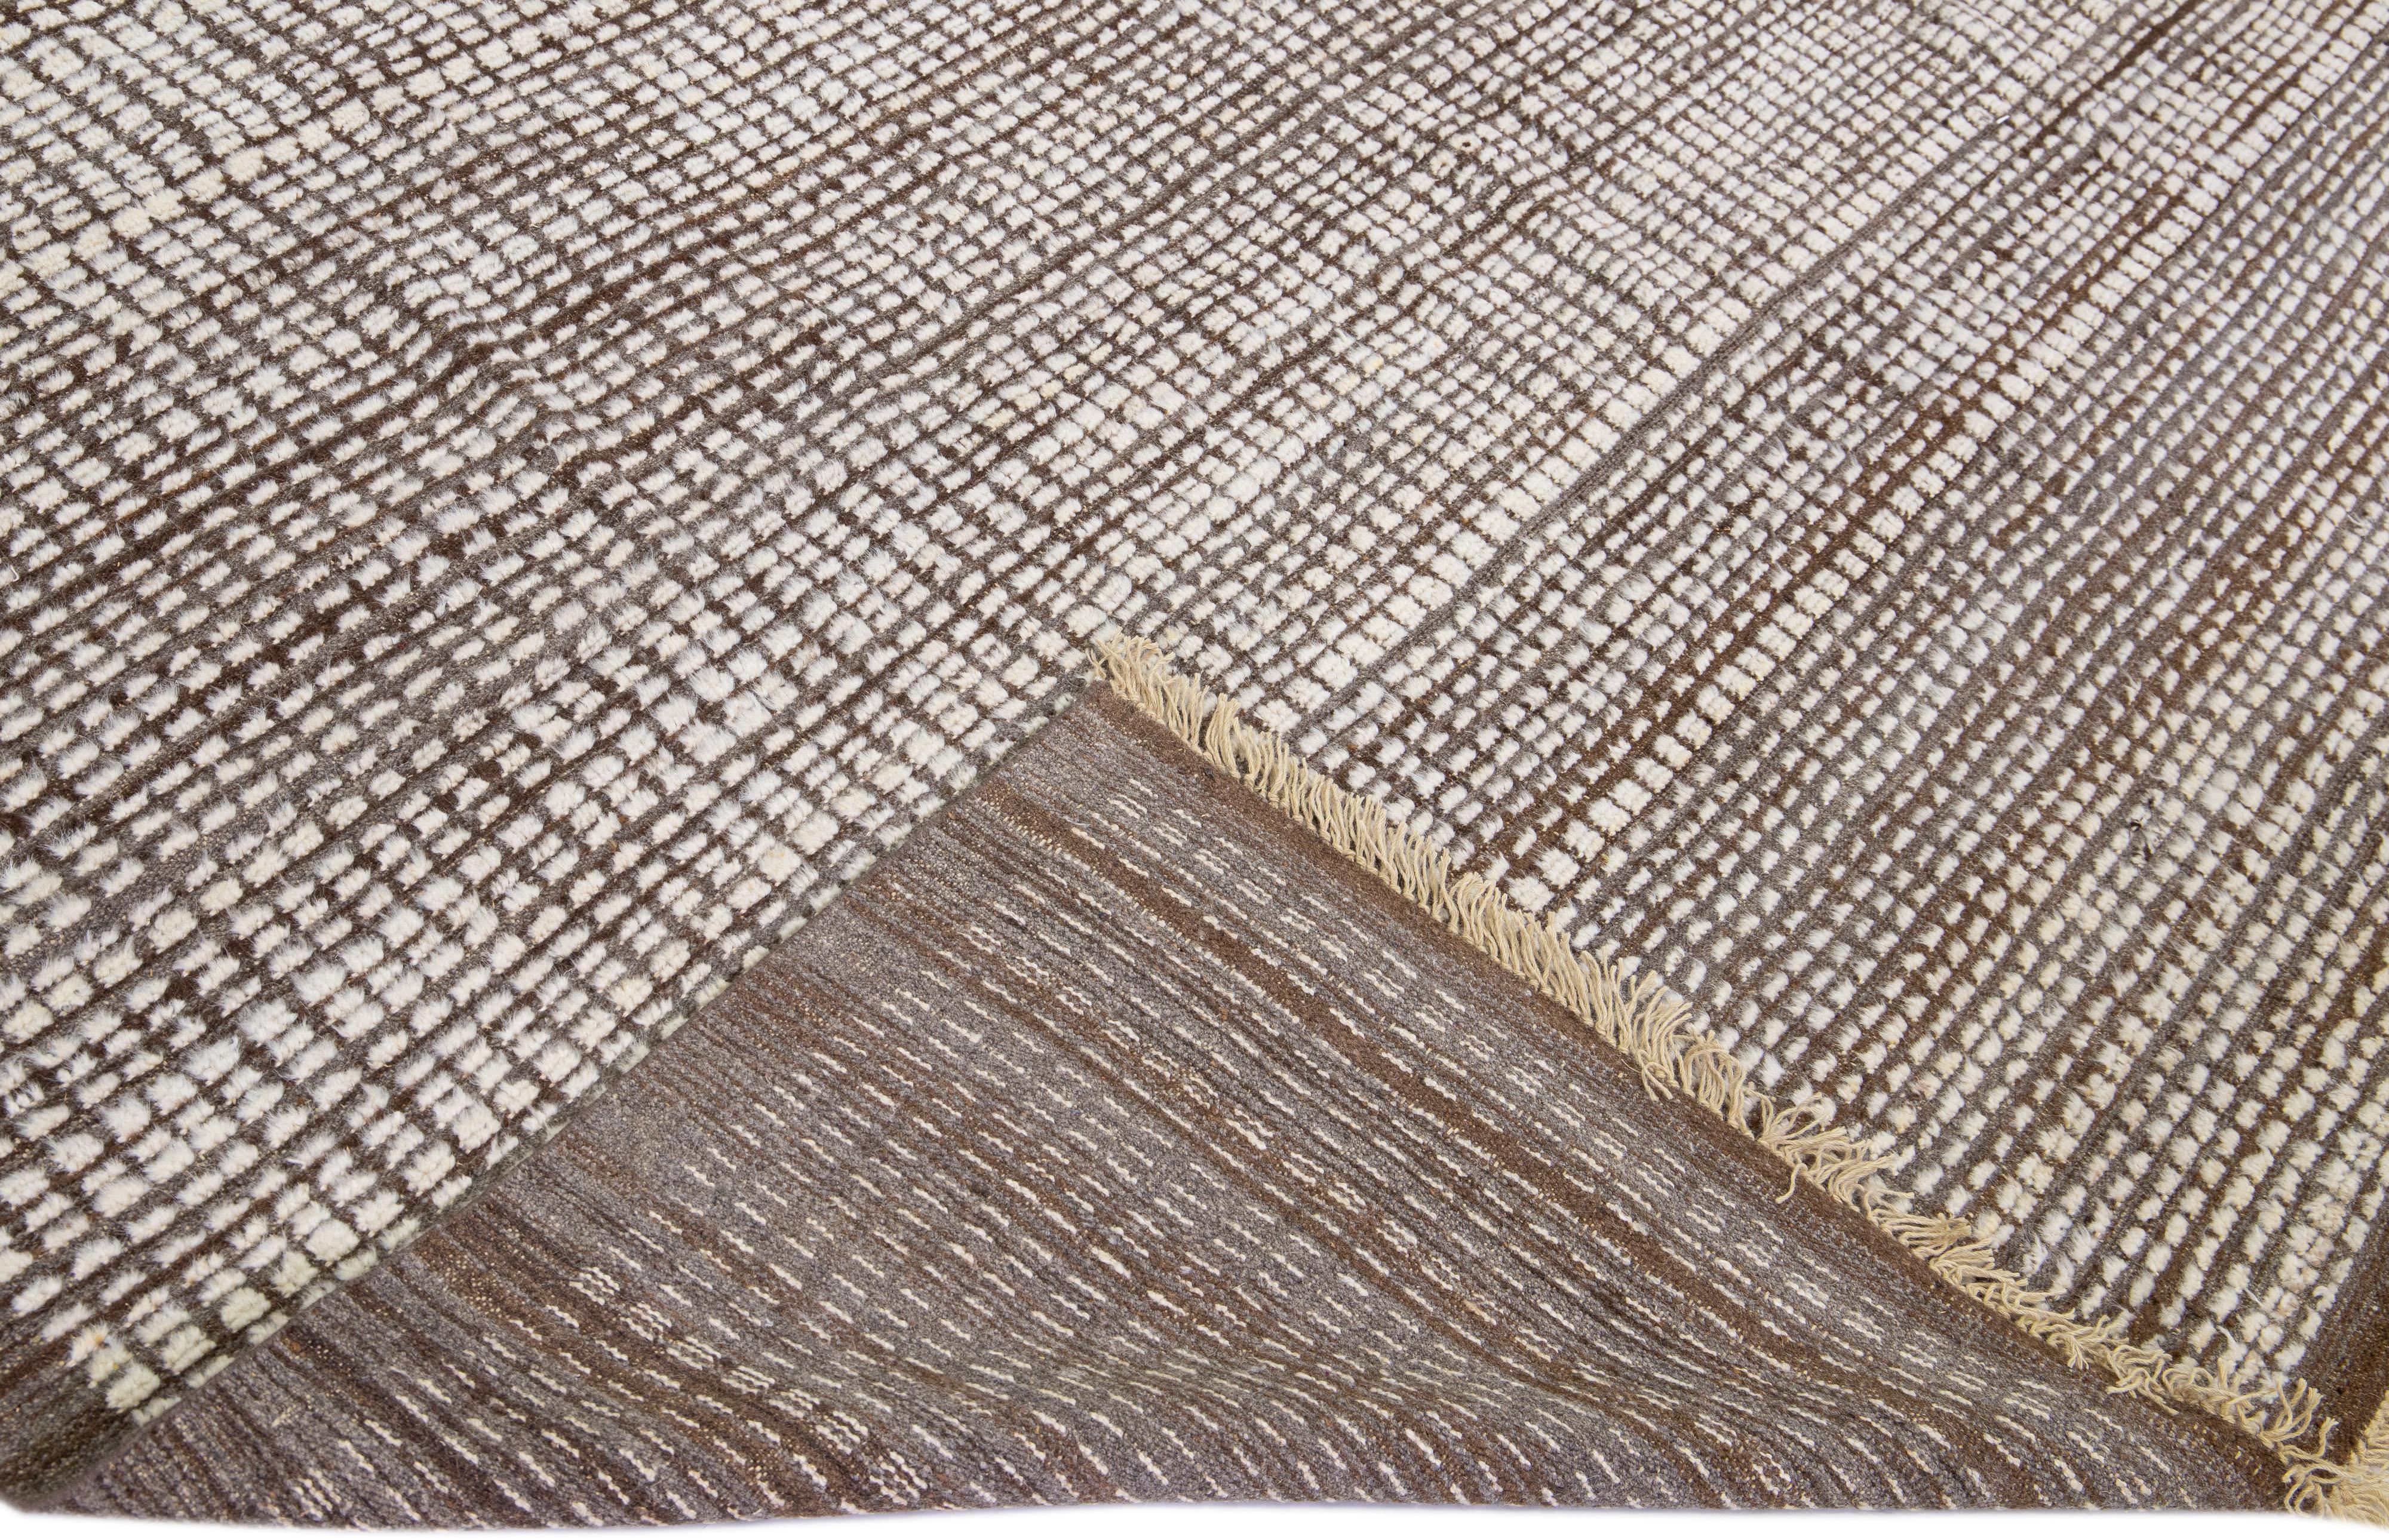 Beautiful modern Moroccan style hand-knotted wool rug with a brown field. This piece has a gorgeous subtle geometric pattern design.

This rug measures: 10'9